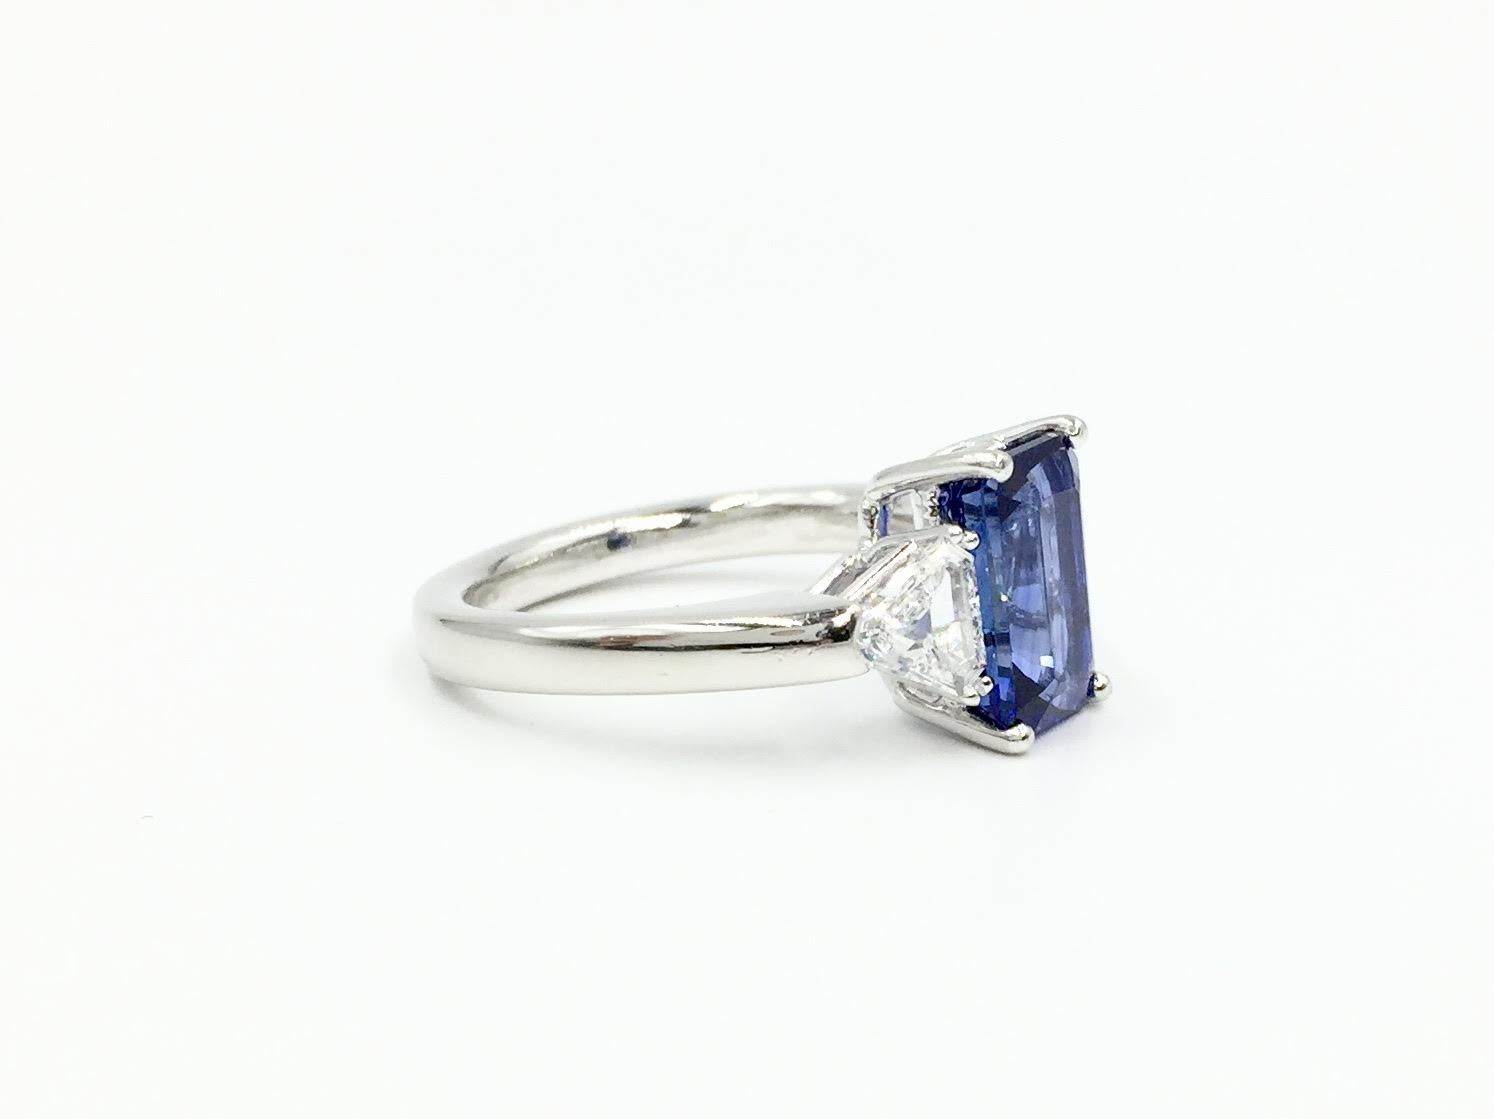 A classic blue sapphire and diamond three stone platinum ring using exceptional quality stones by high-end jewelry designer J. Stella. Center features an exquisite, highly saturated 3.13 carat emerald cut blue sapphire with the perfect amount of